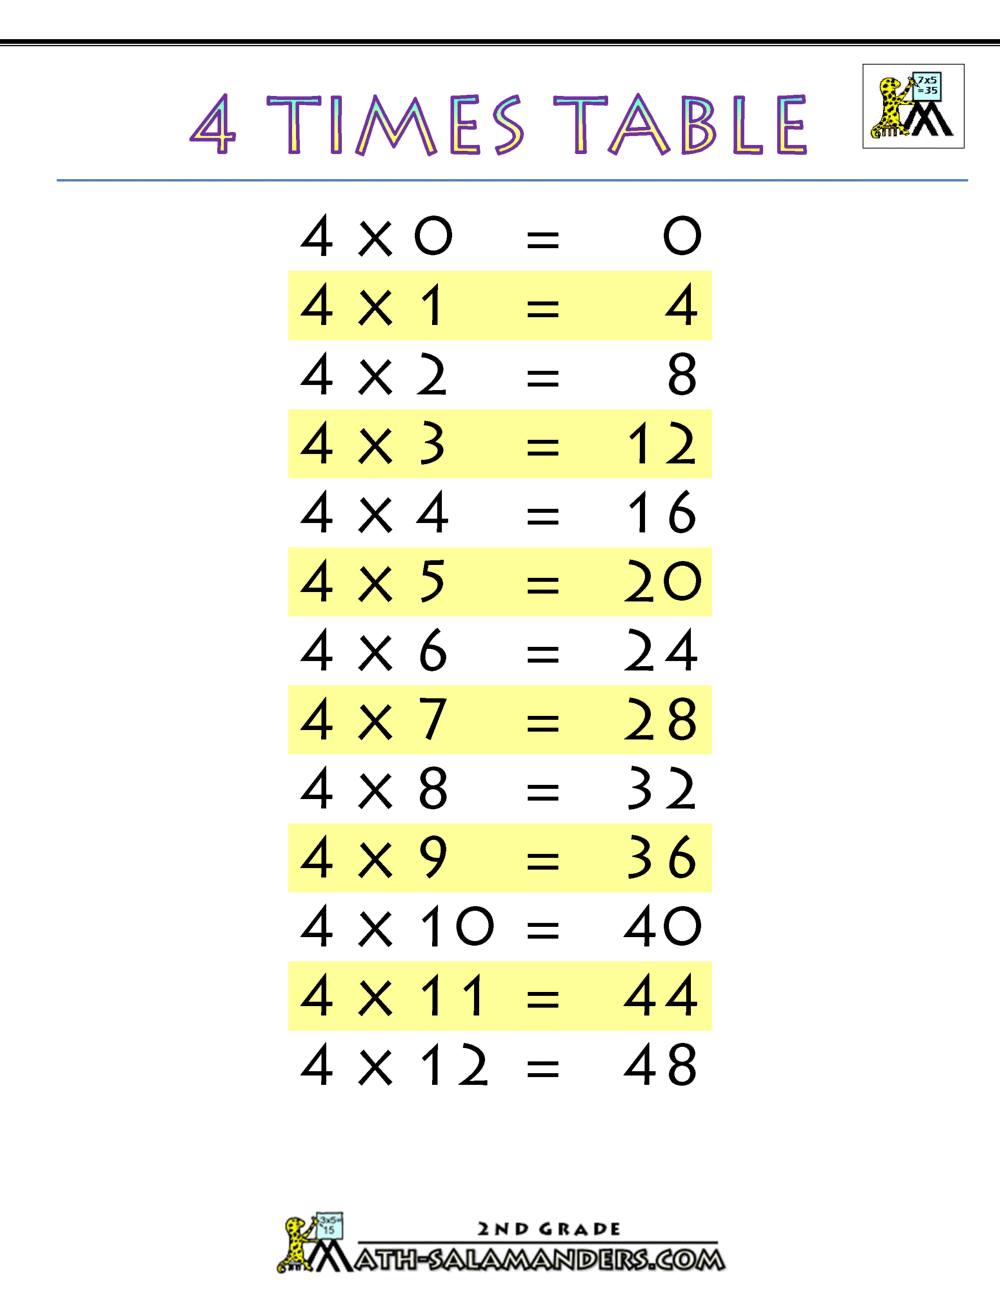 multiplication times table times table worksheets